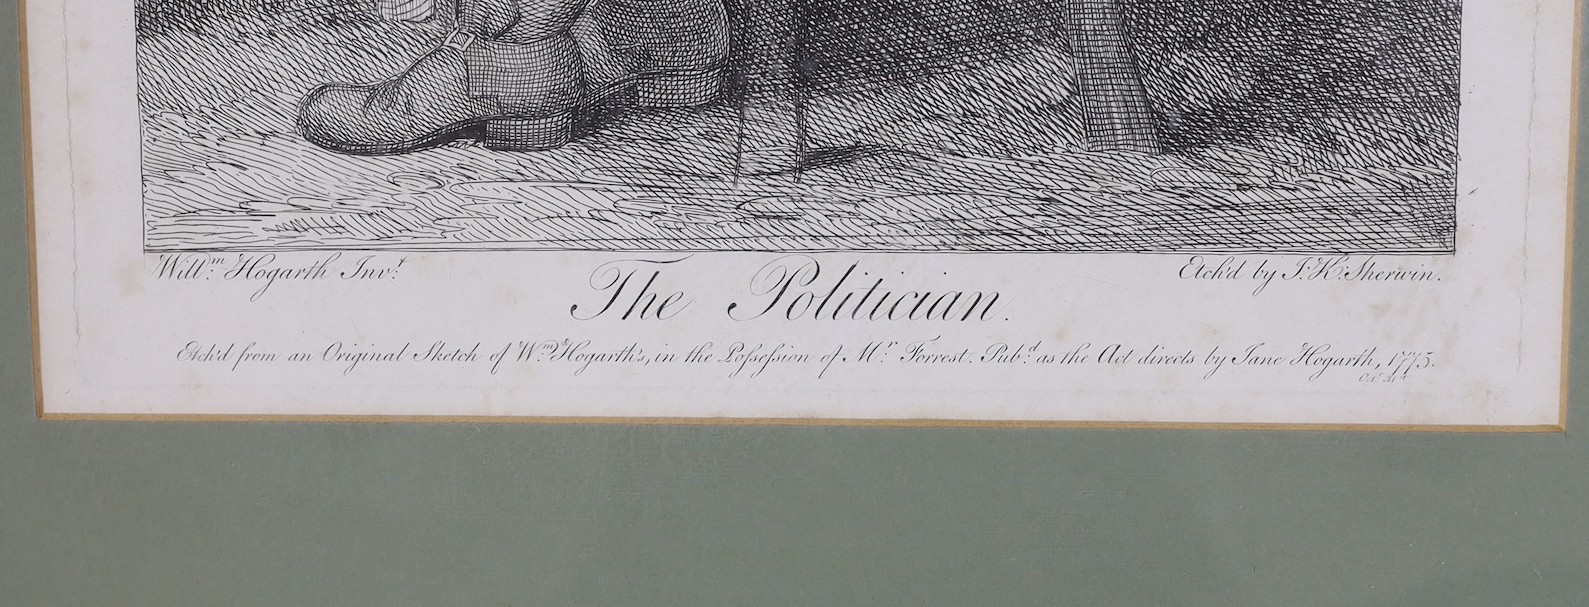 Sherwin after Hogarth, engraving, 'The Politician', overall 39 x 31cm